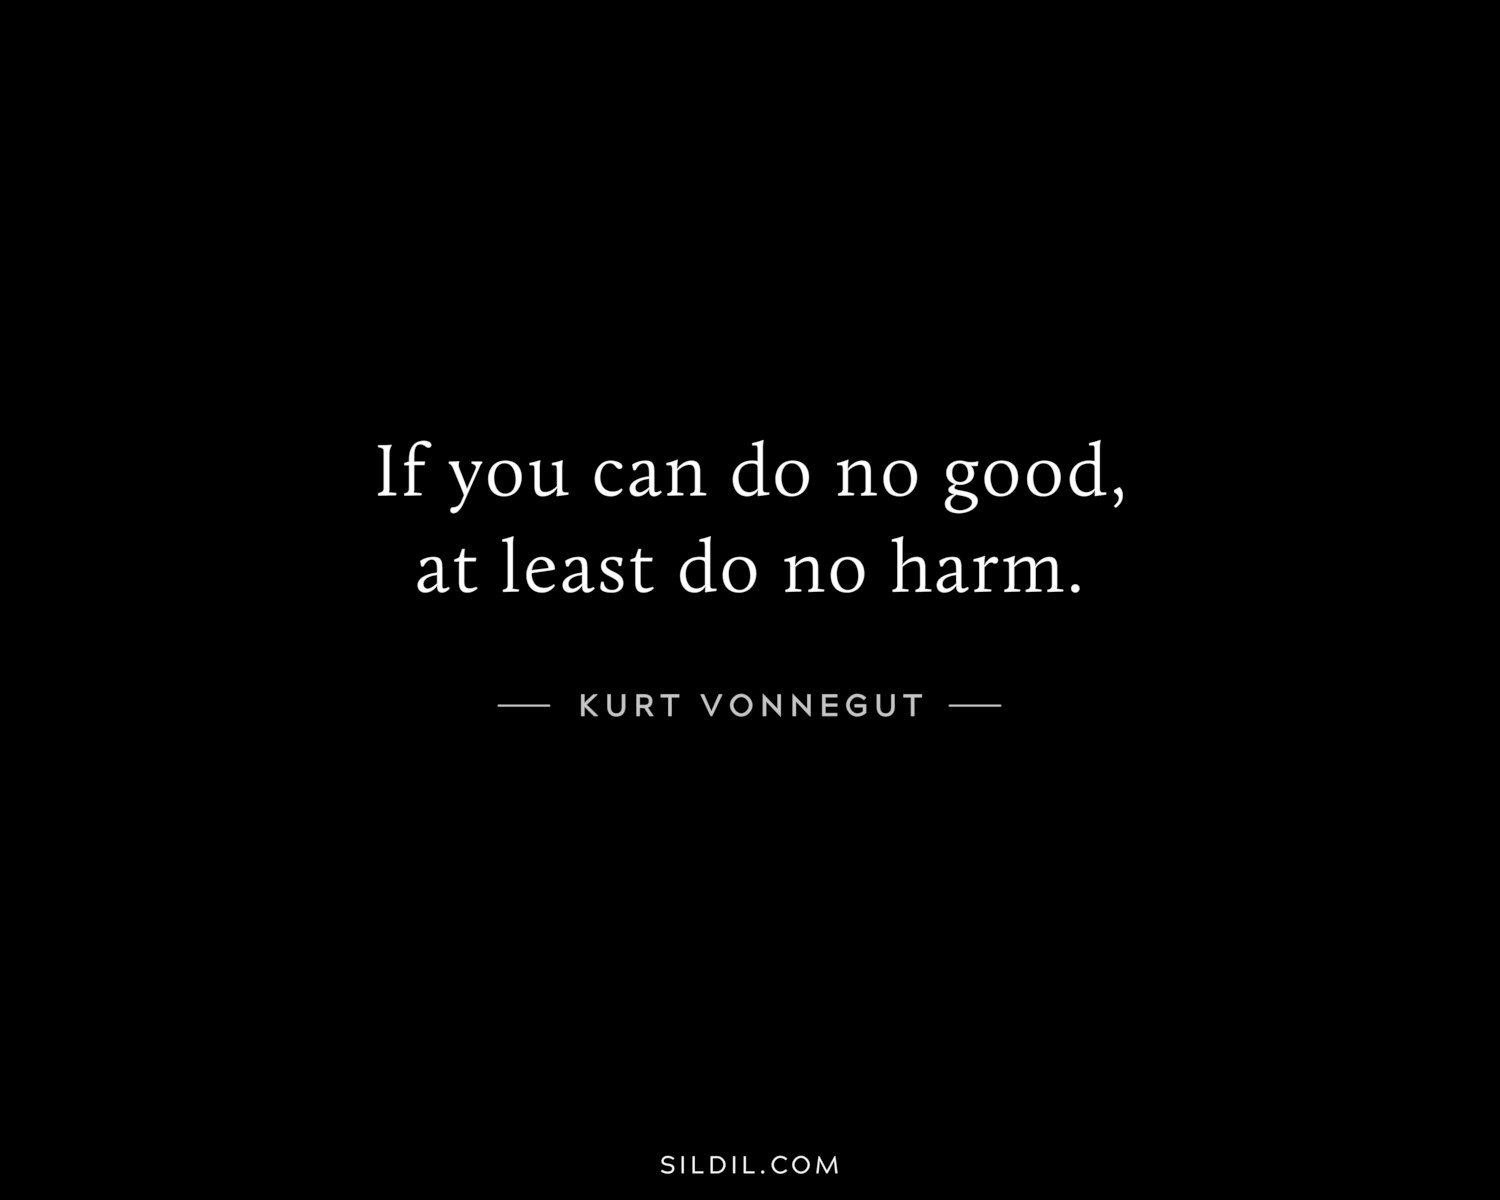 If you can do no good, at least do no harm.